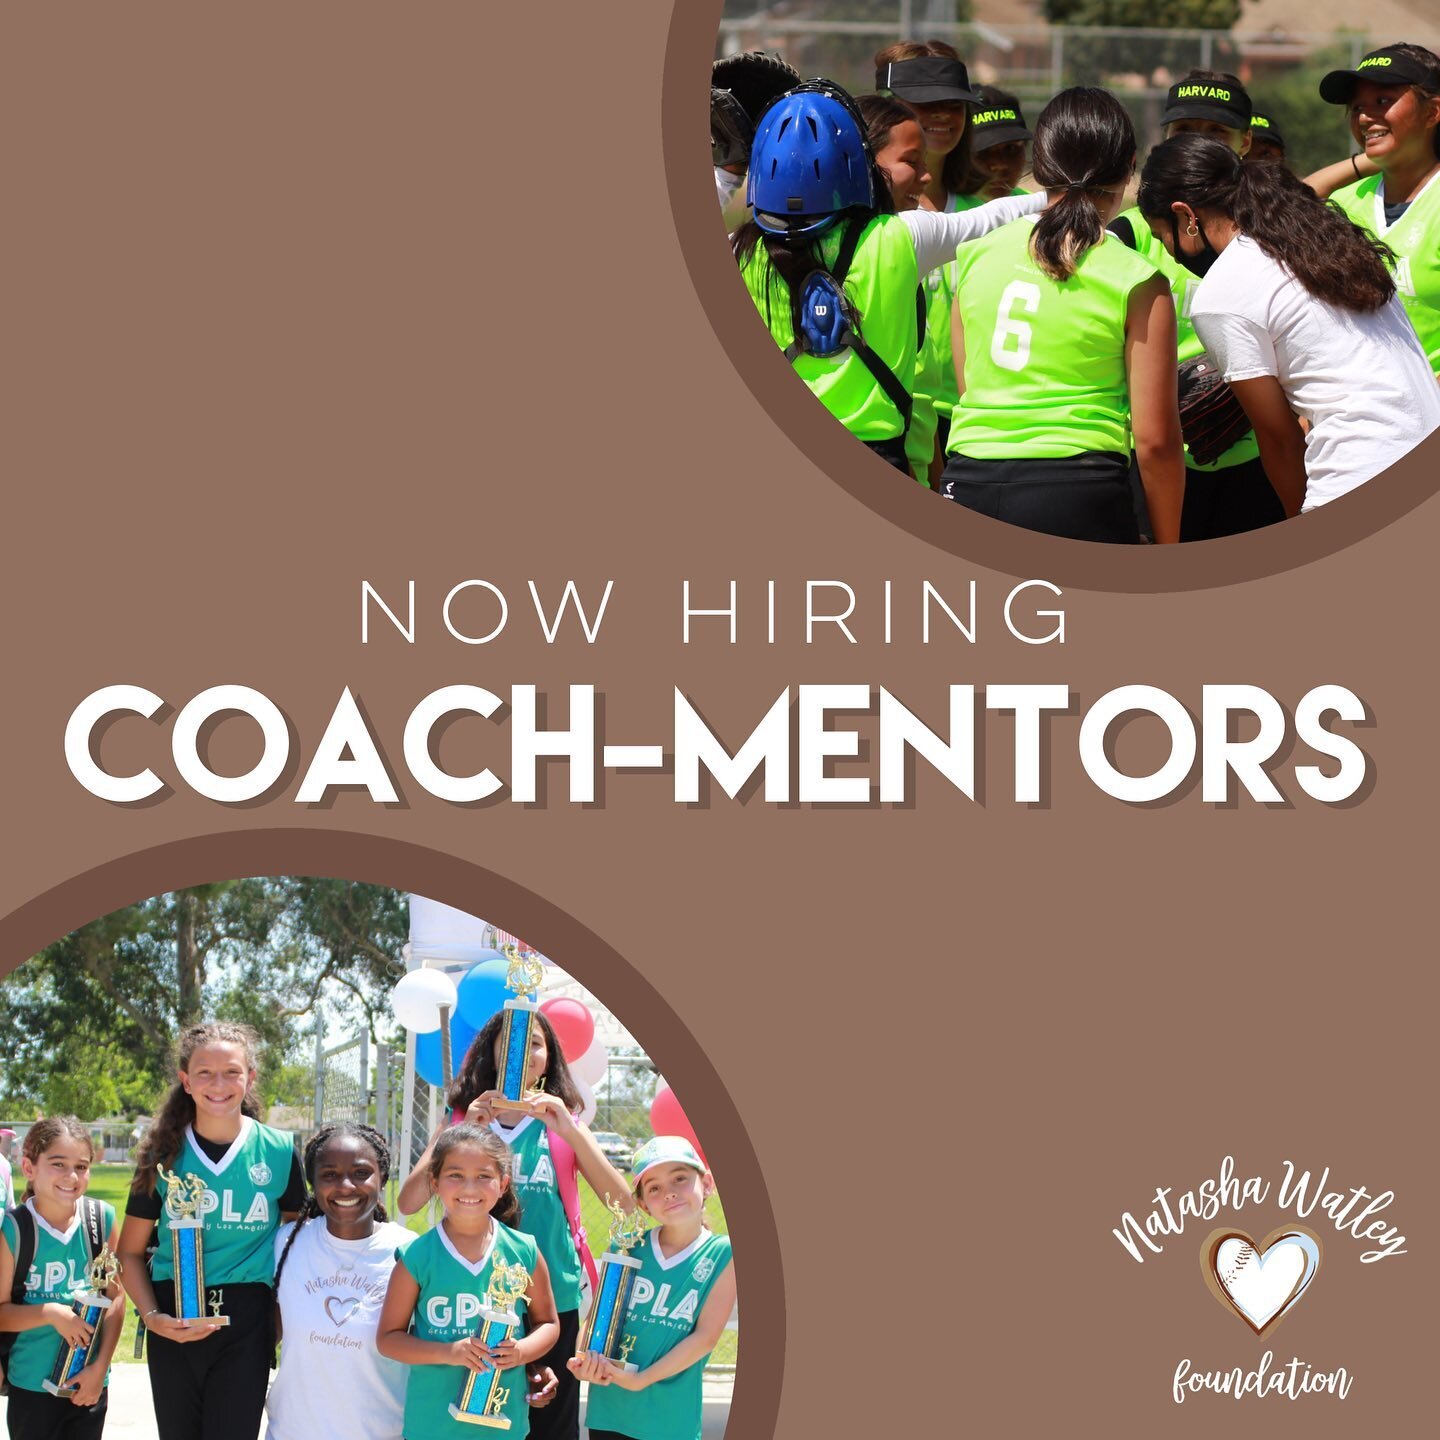 Interested in becoming a Coach-Mentor for The Natasha Watley Foundation? ✨

Click the link in our bio to fill out the questionnaire! You&rsquo;re on your way to making an impact in our sport. 🤎